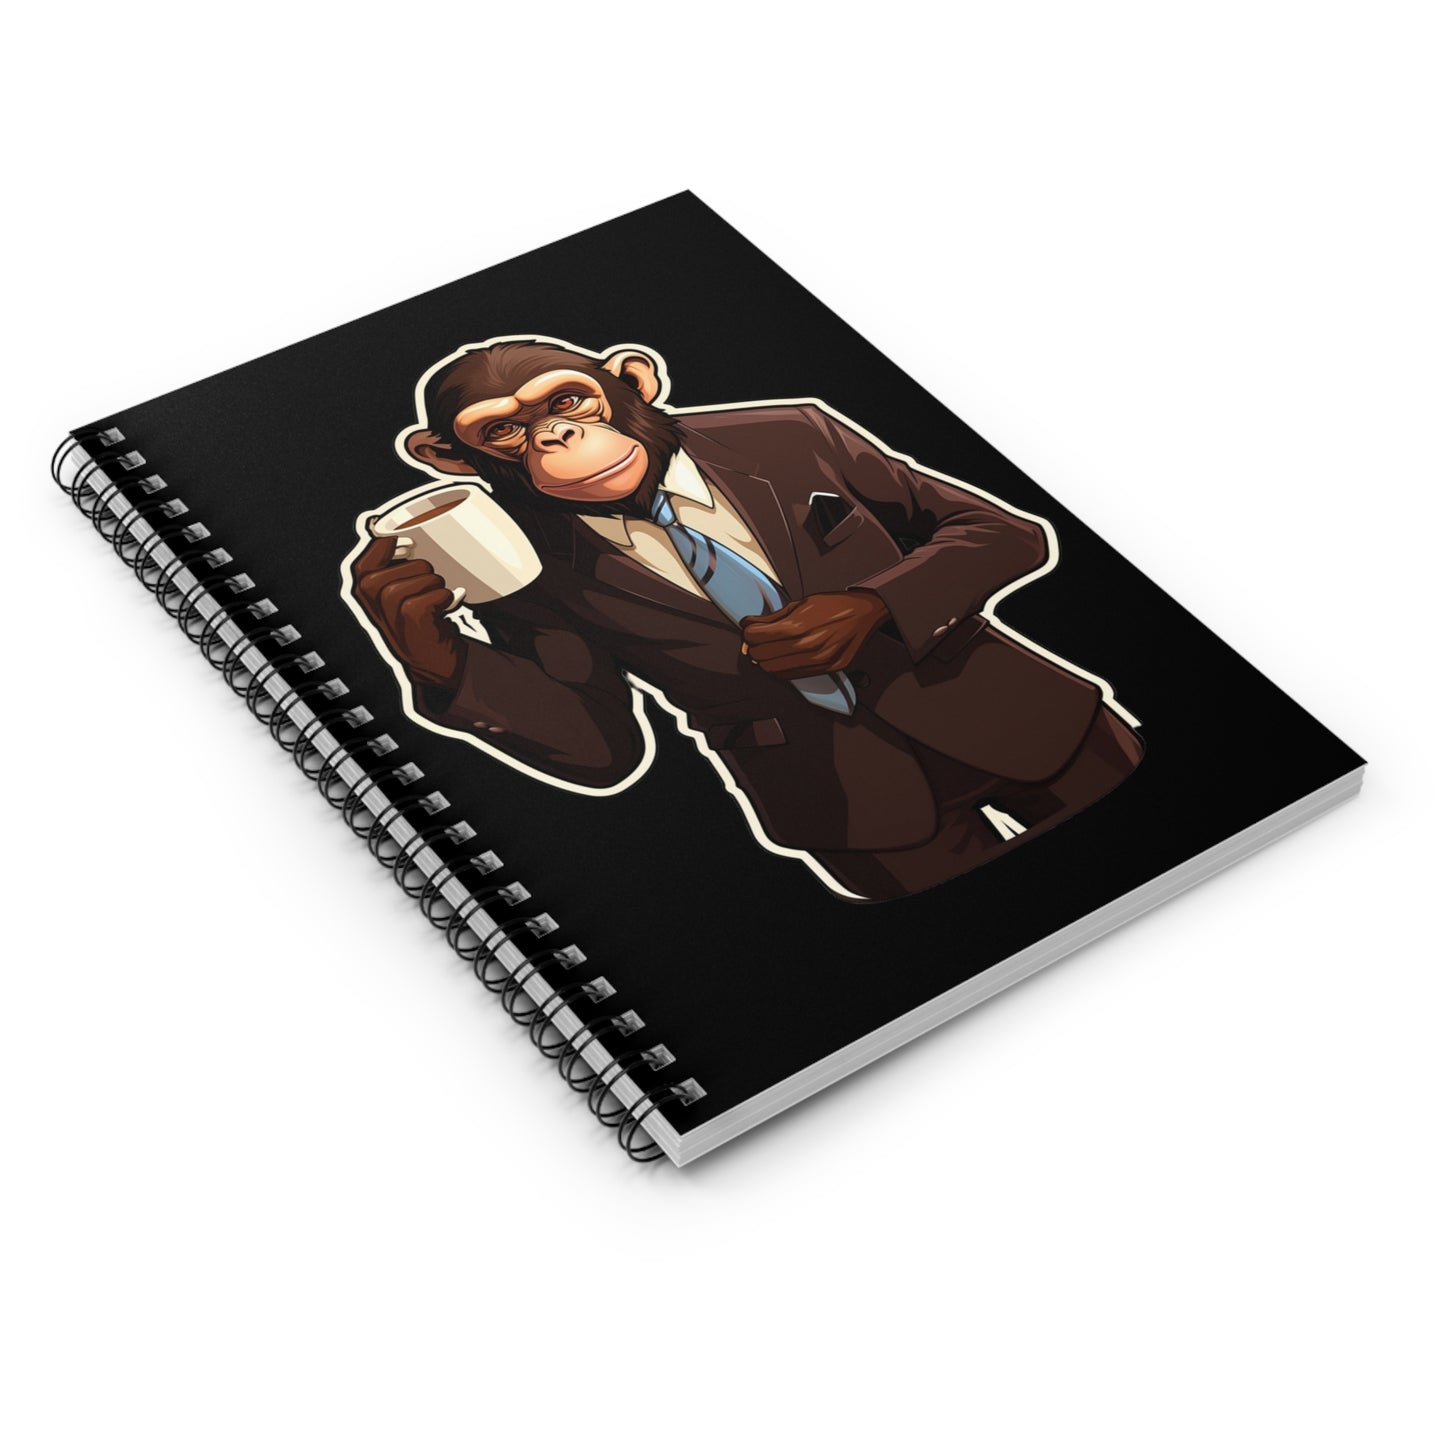 Monkey Business | Spiral Notebook - Ruled Line